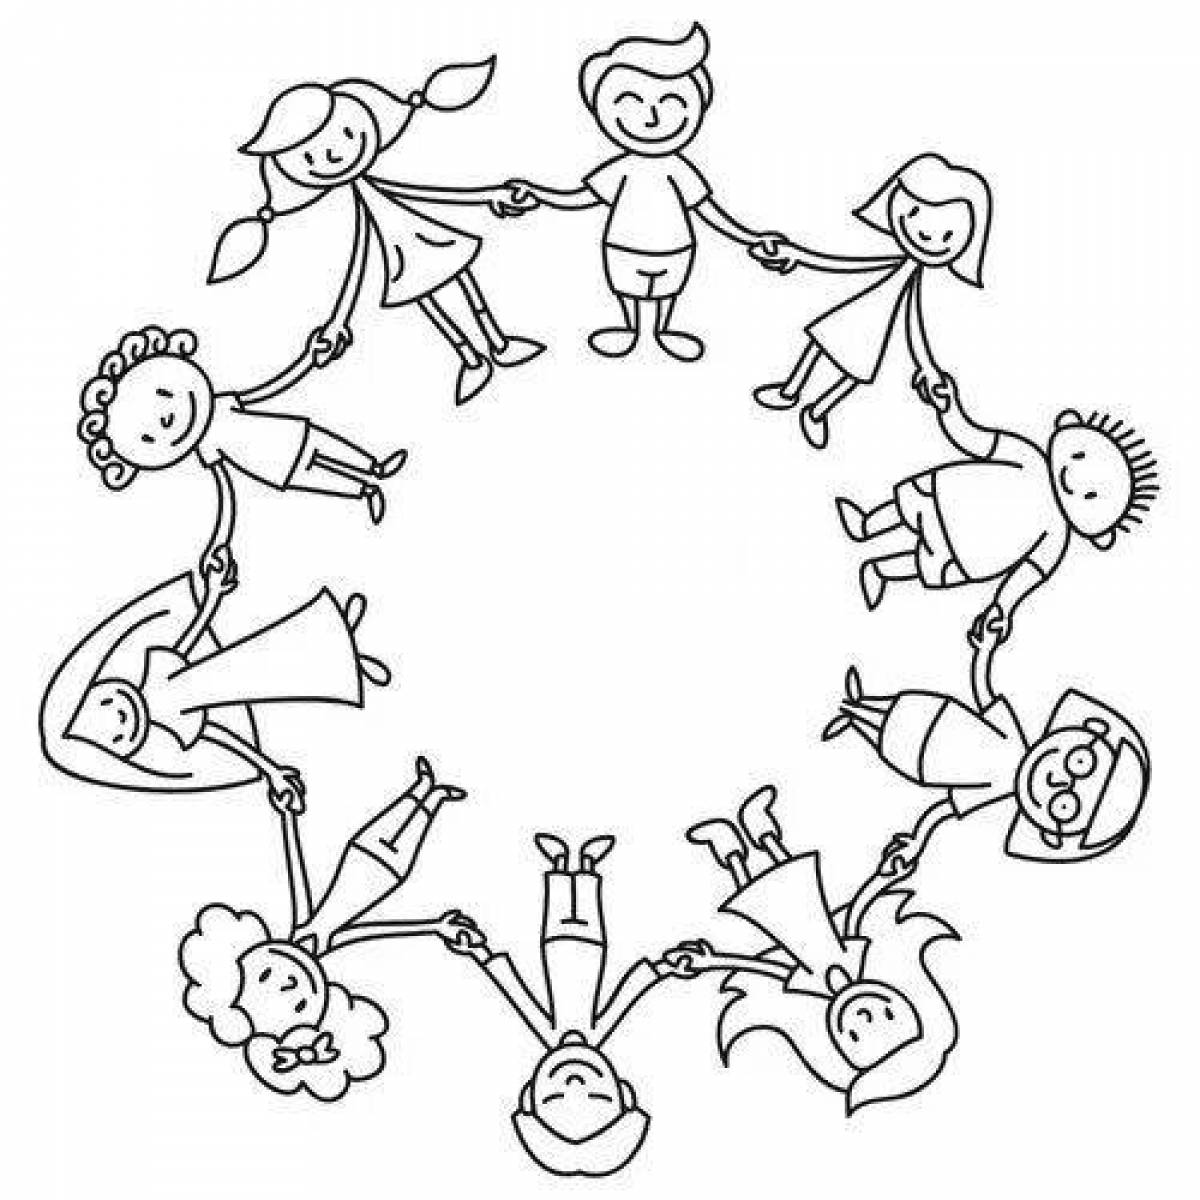 Coloring page happy round dance